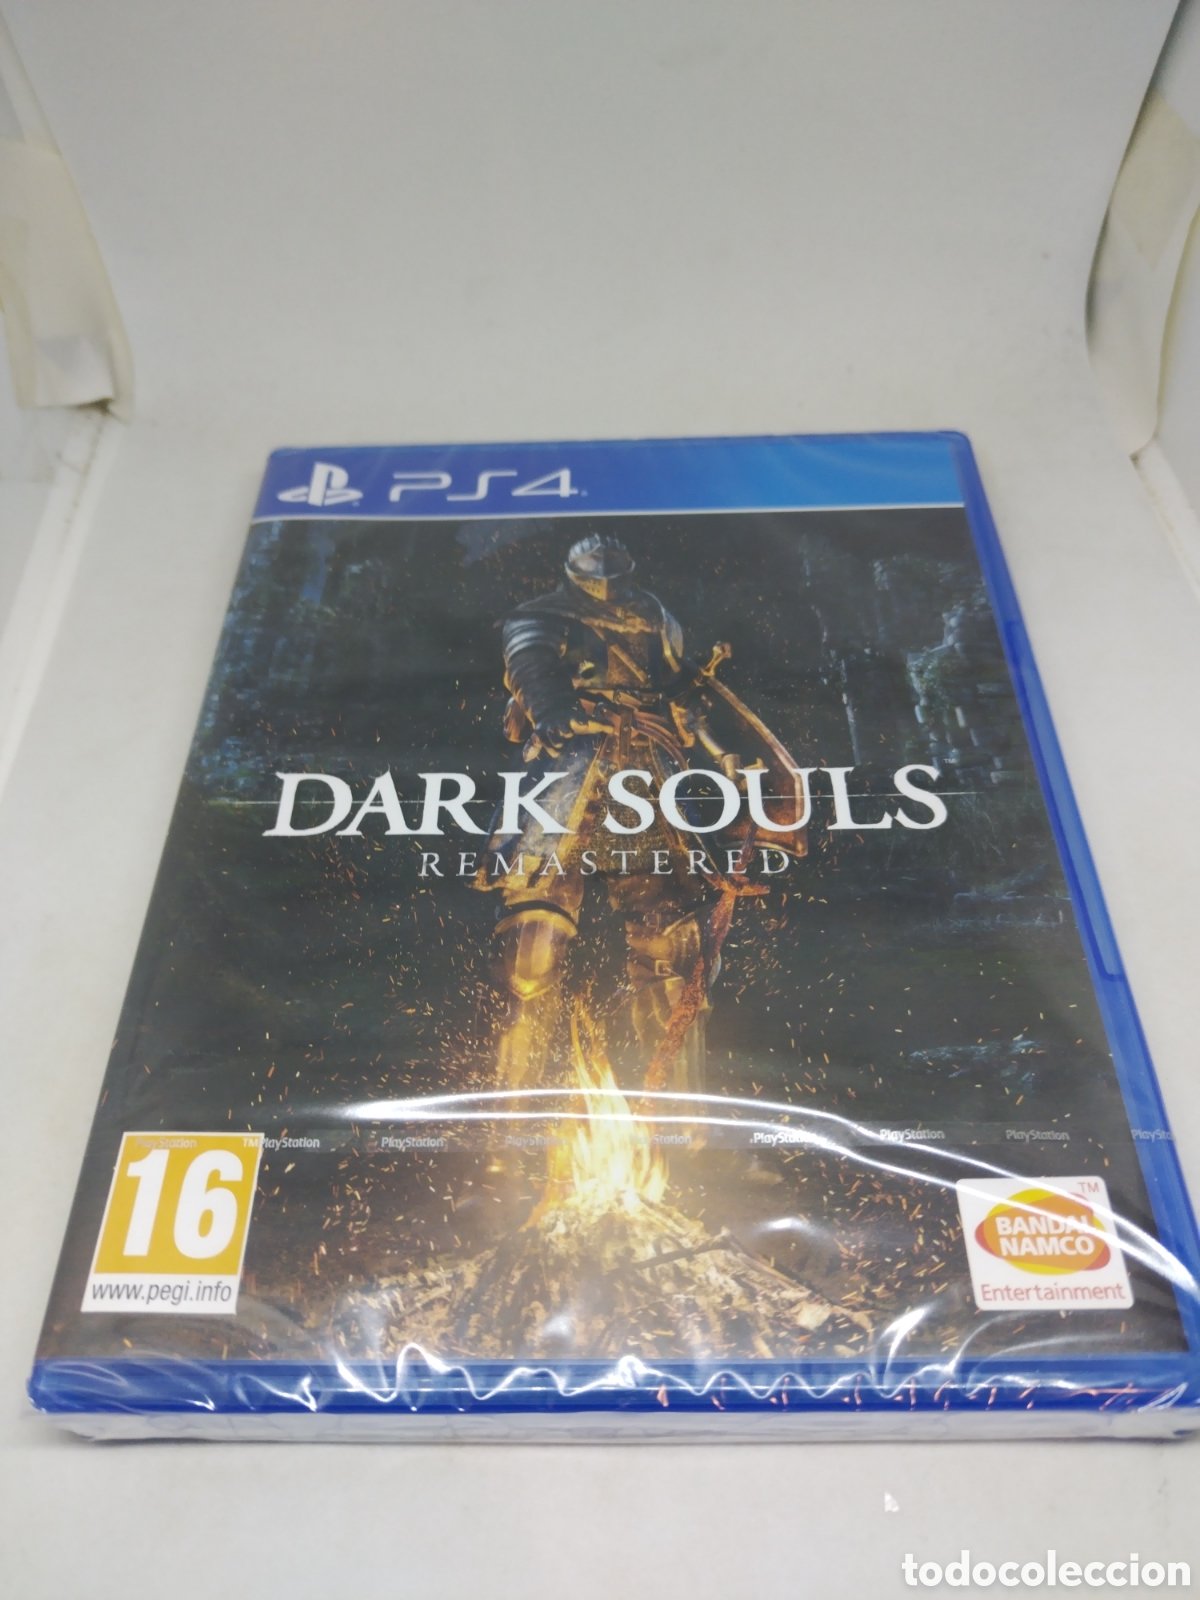 sony ps4 dark souls trilogy - Buy Video games and consoles PS4 on  todocoleccion